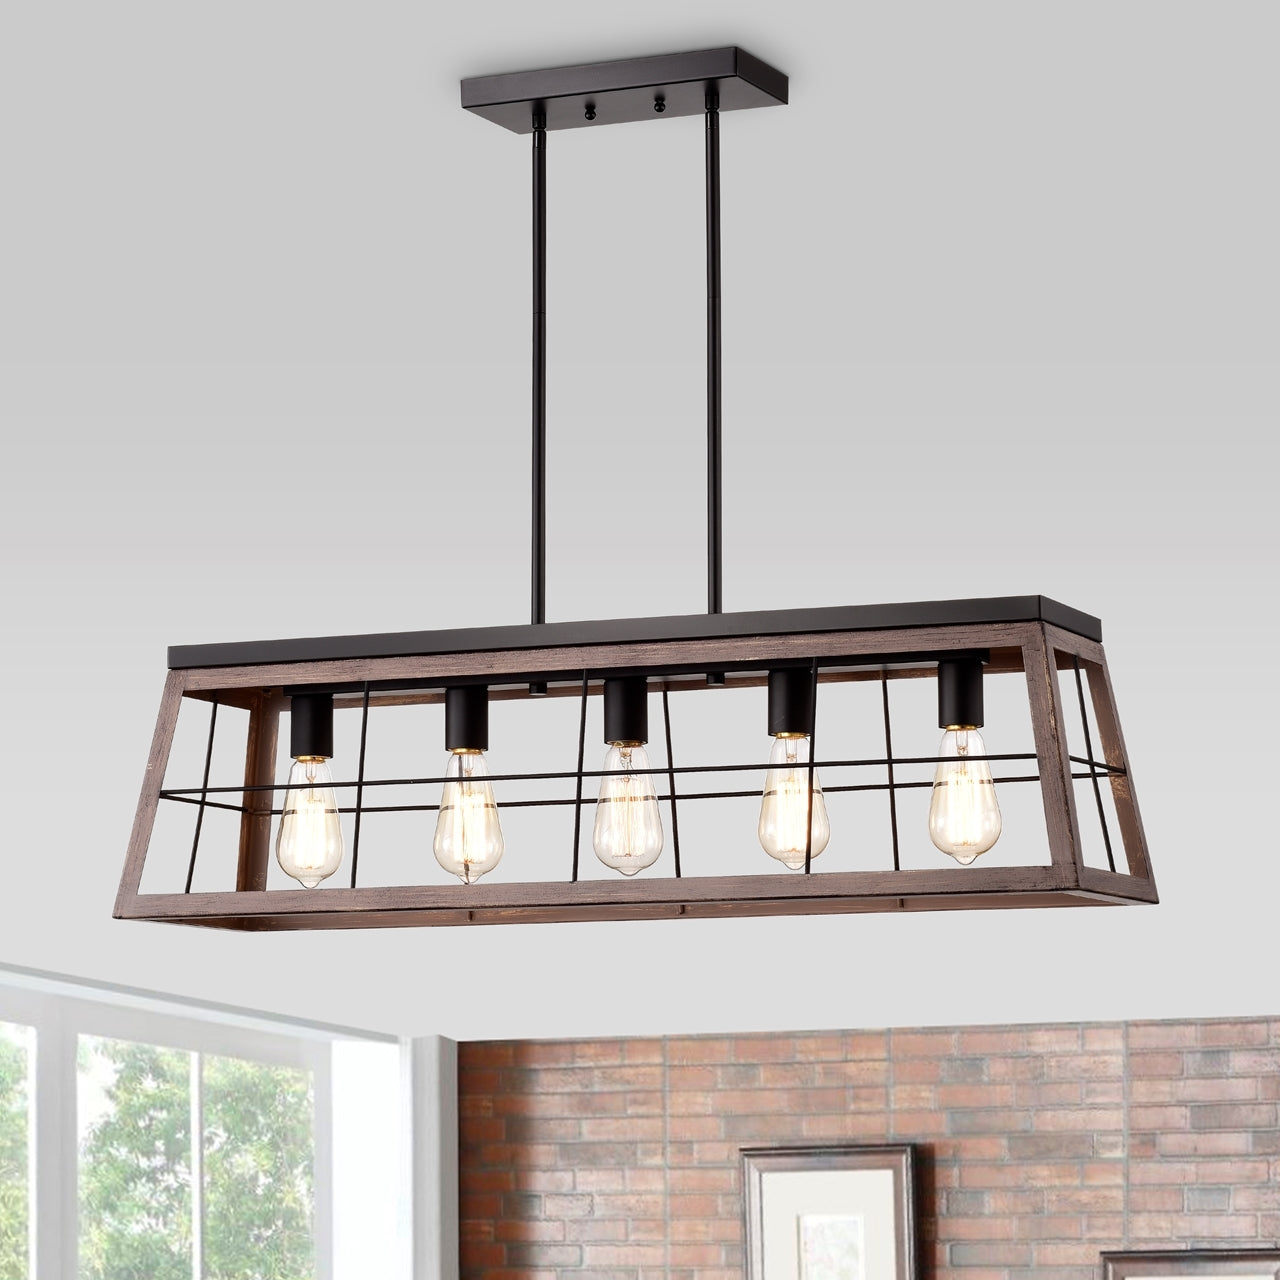 IRONCLAD Industrial 5 Light Ancient Wood Island Pendant Ceiling Fixture 35" Wide